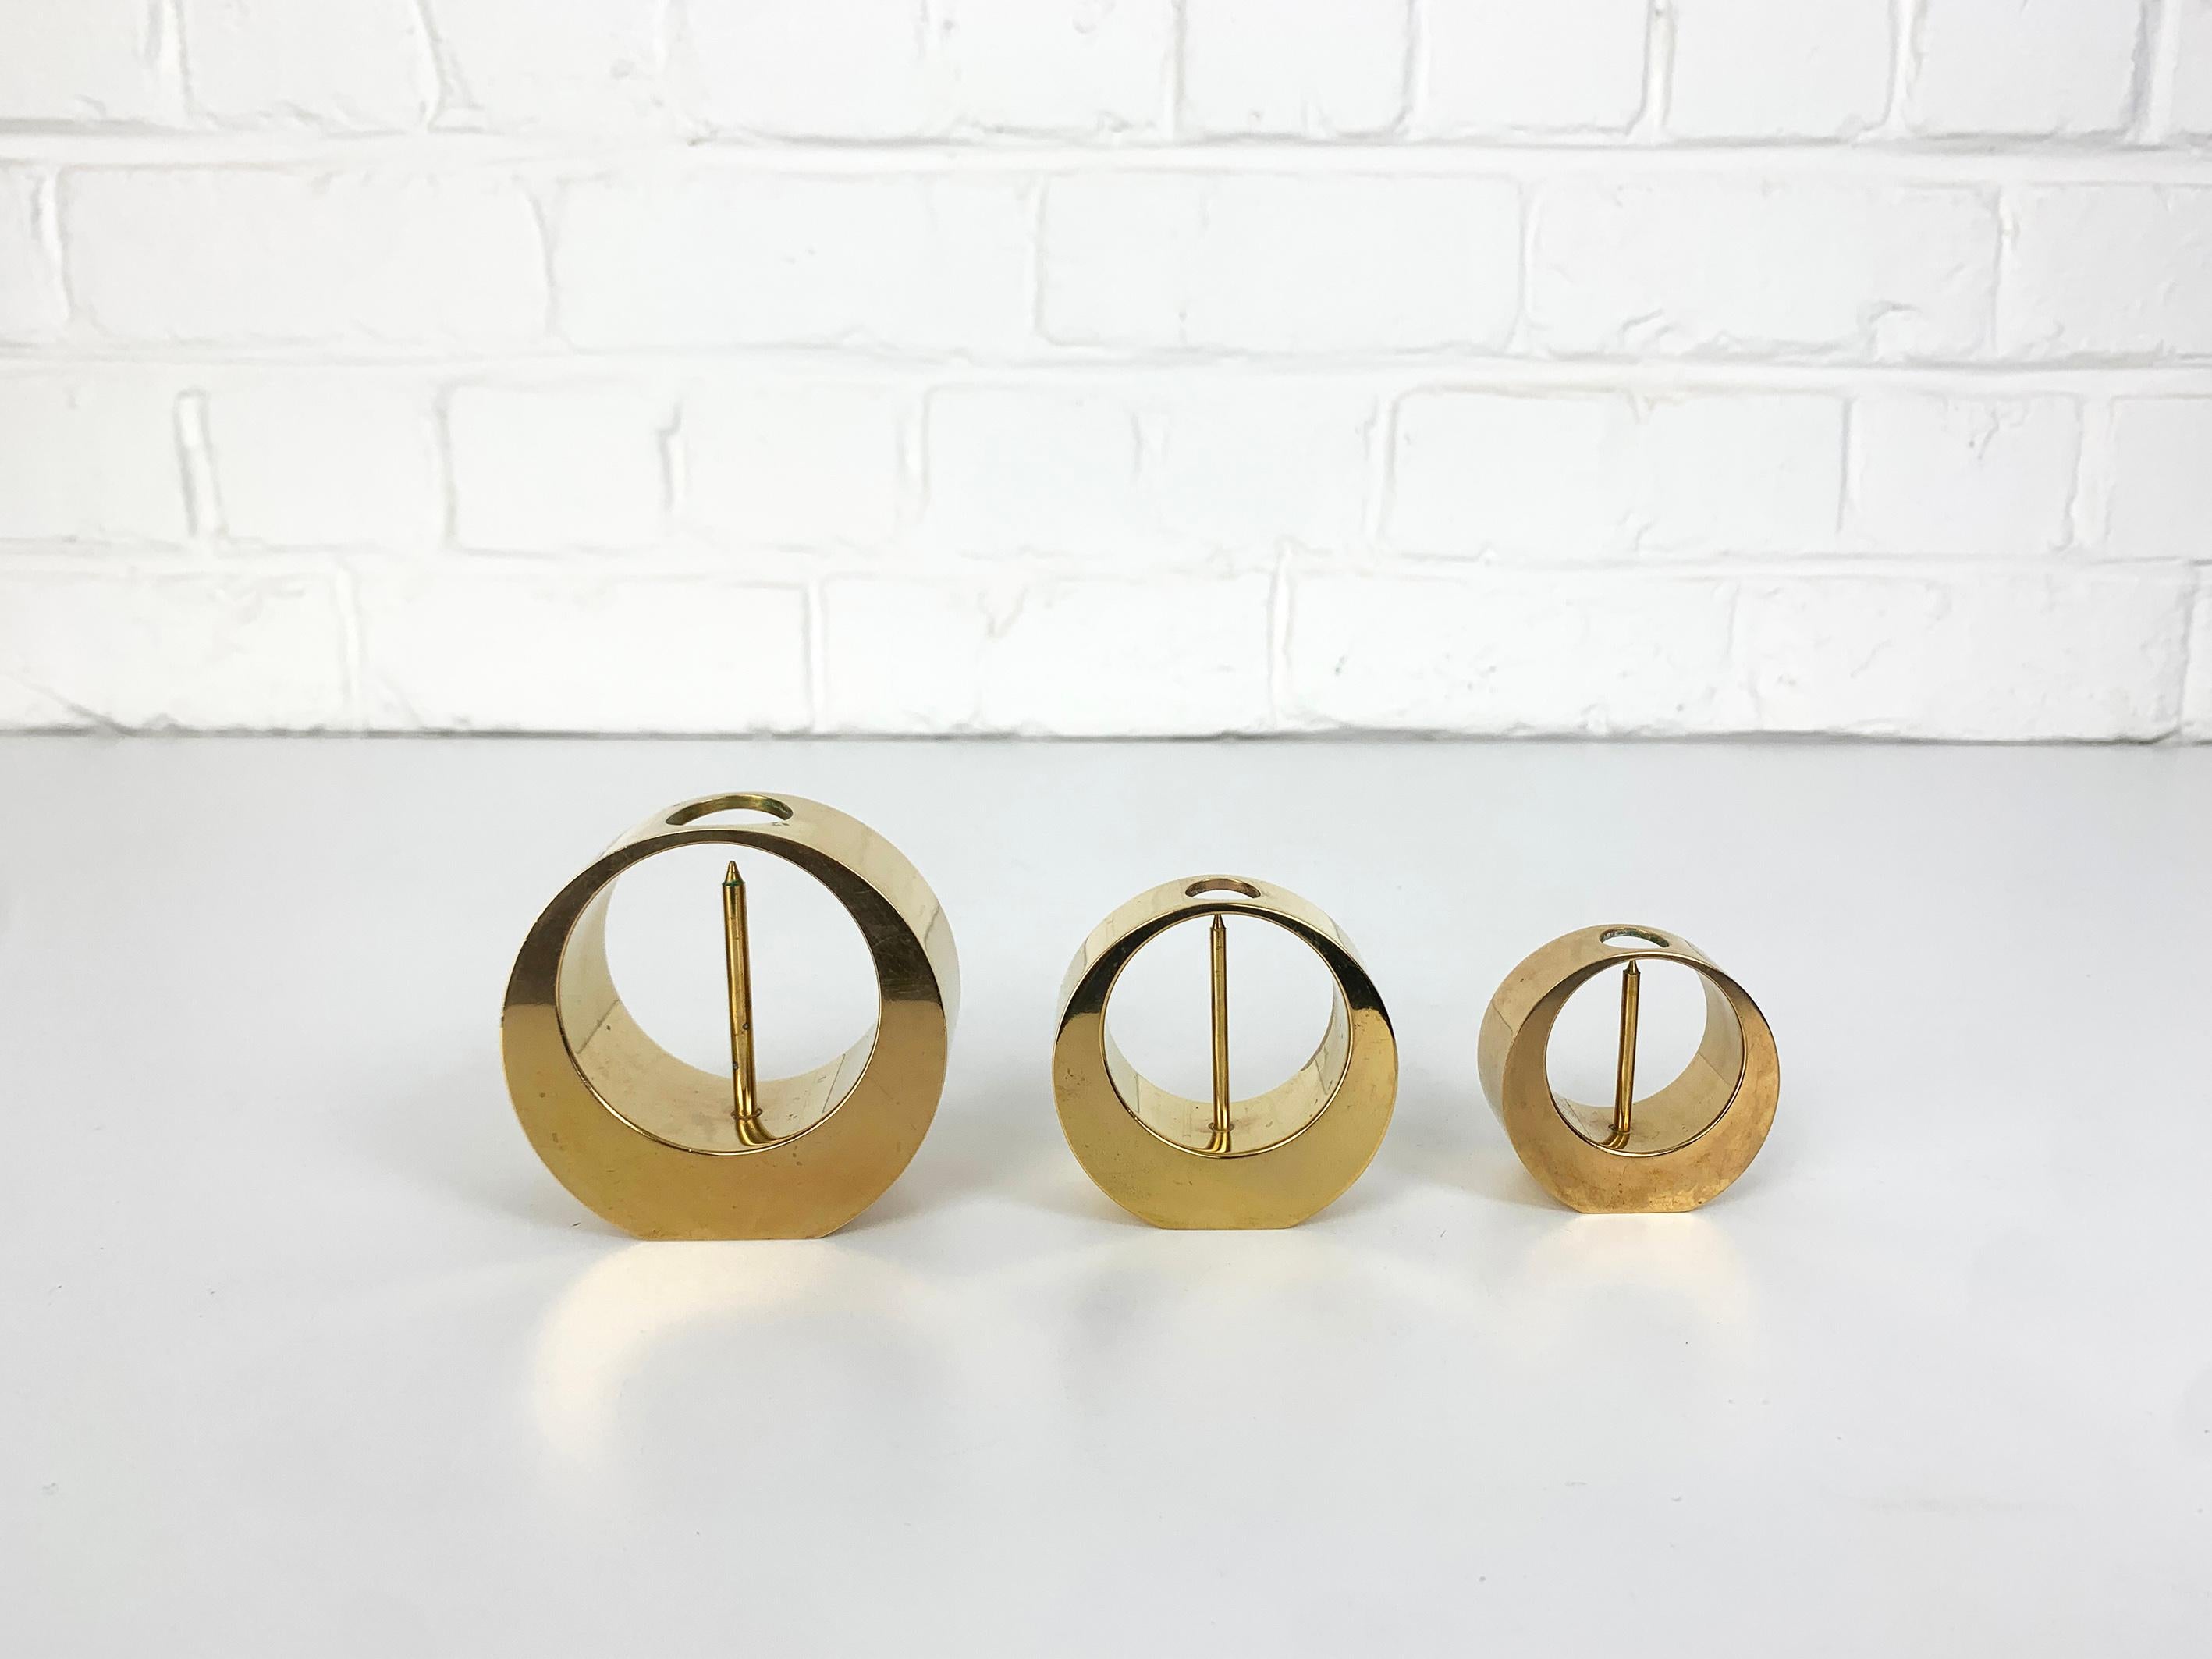 A set of three Mid-Century candle-sticks or candle-holders in solid brass. 

Created and made by Arthur Petterson, he signed his candleholders “Arthur Pe Kolbäck”.

The artist was born in 1919 in Kolbäck, Sweden, where he lived and worked all his